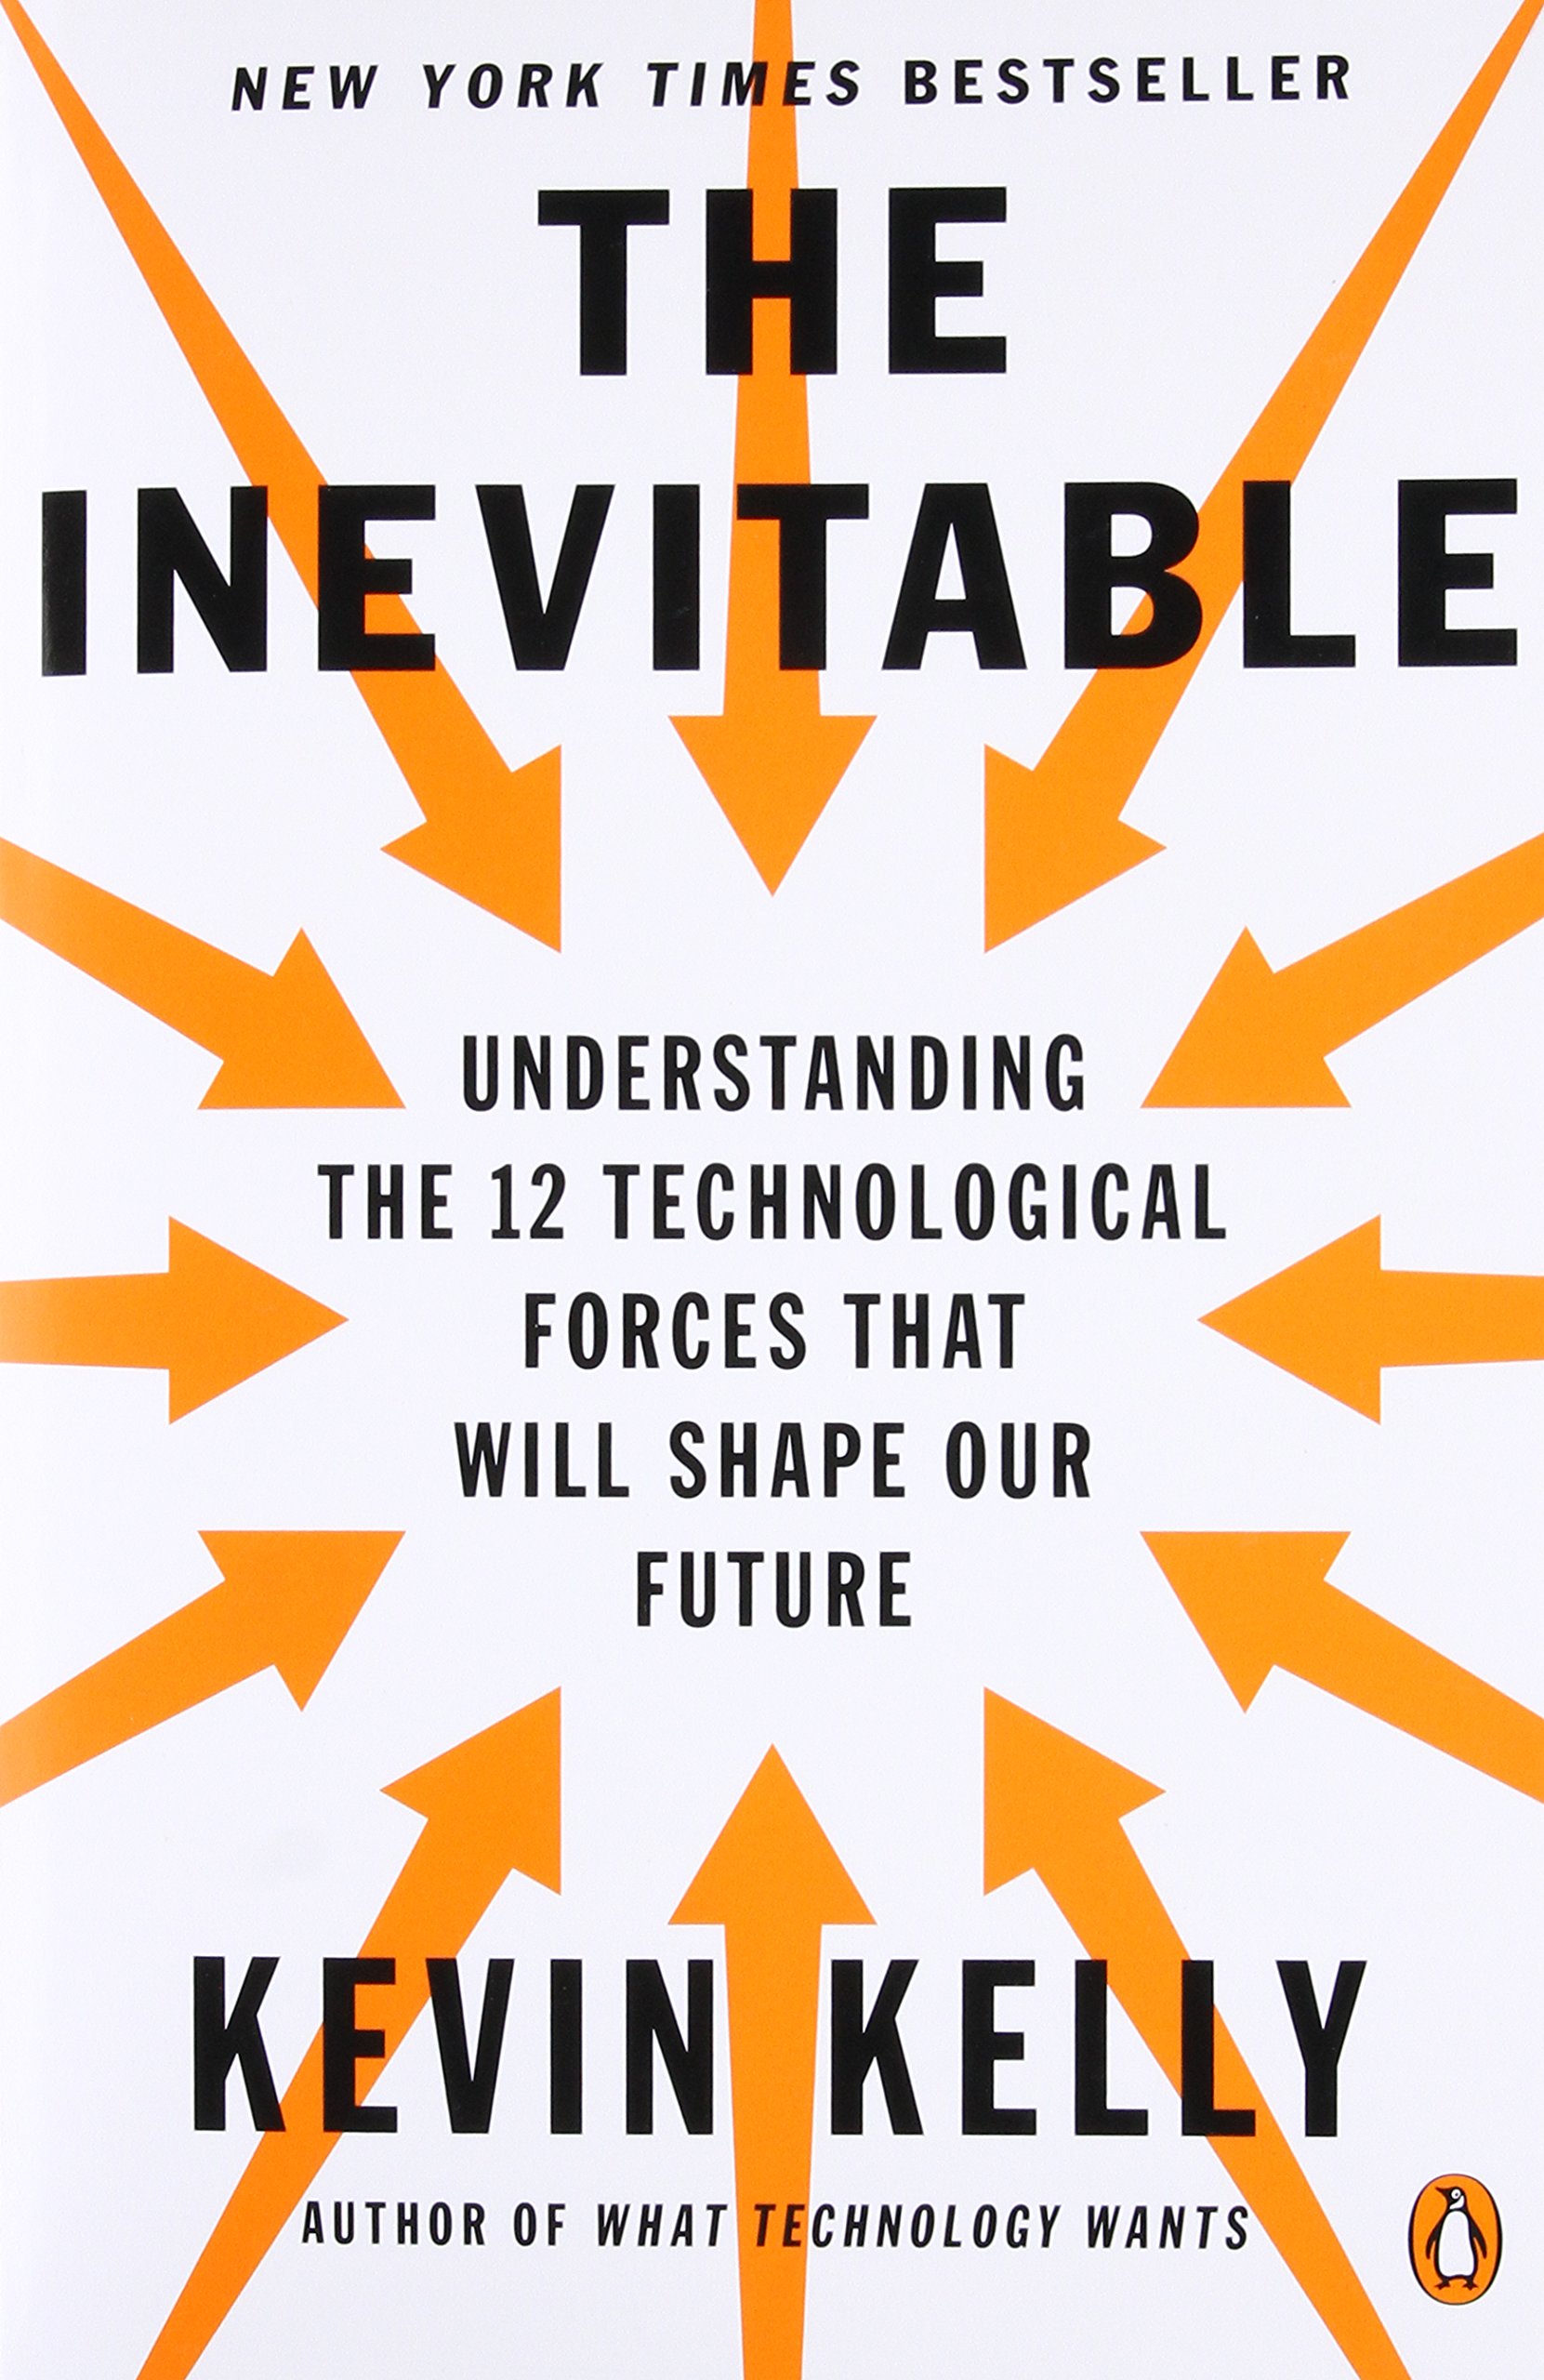 The Inevitable- Understanding the 12 Technological Forces That Will Shape Our Future